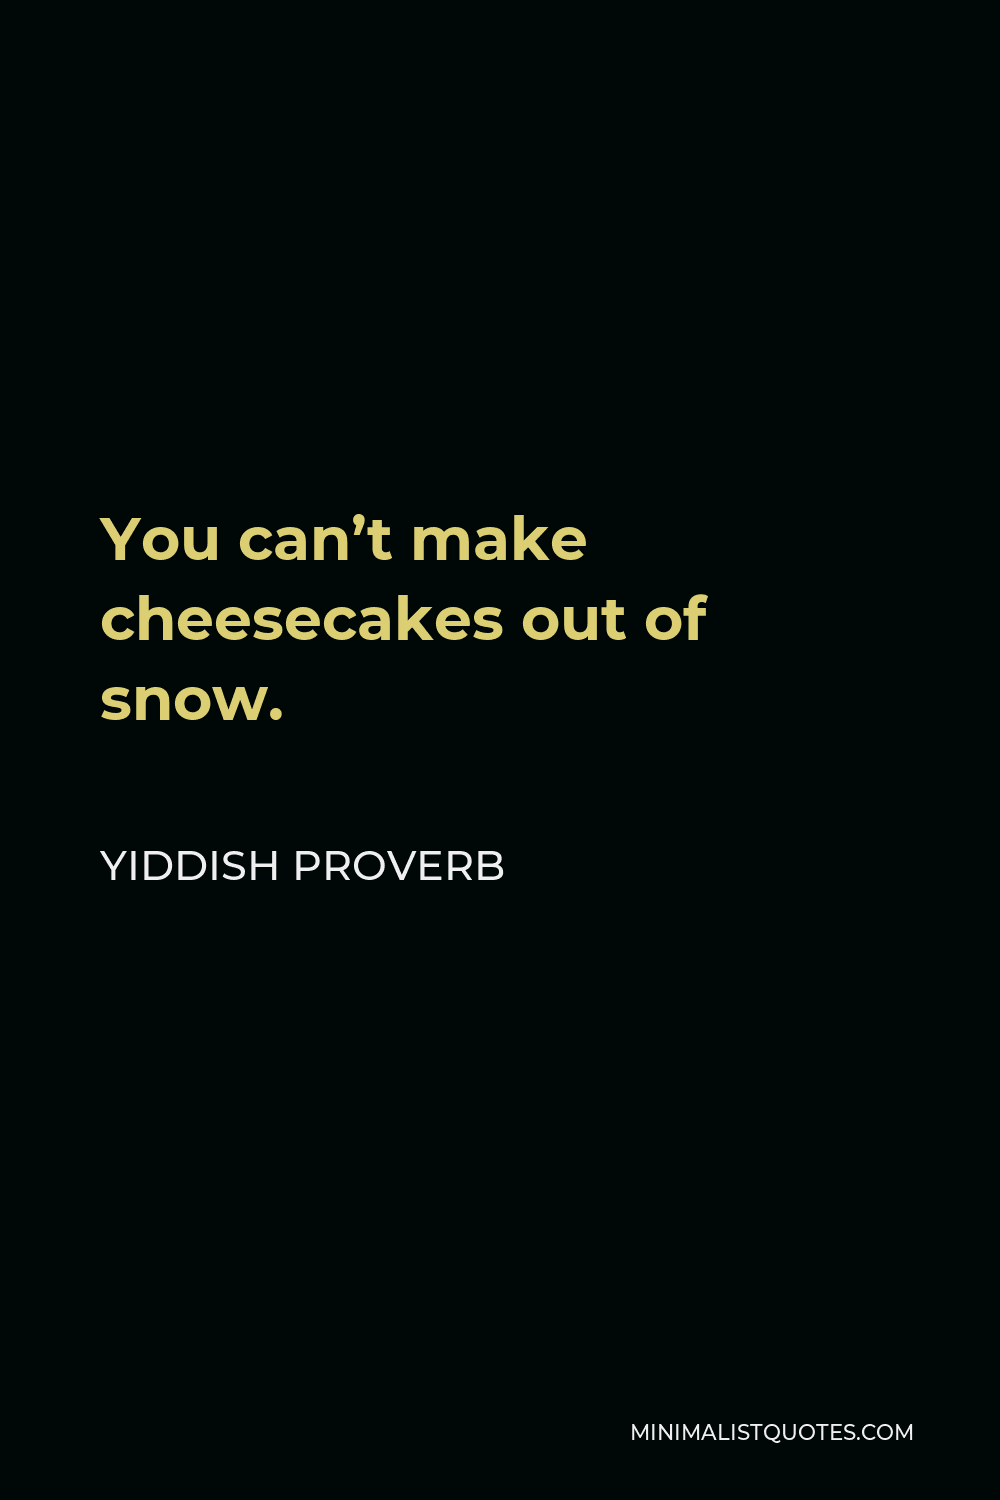 Yiddish Proverb Quote - You can’t make cheesecakes out of snow.